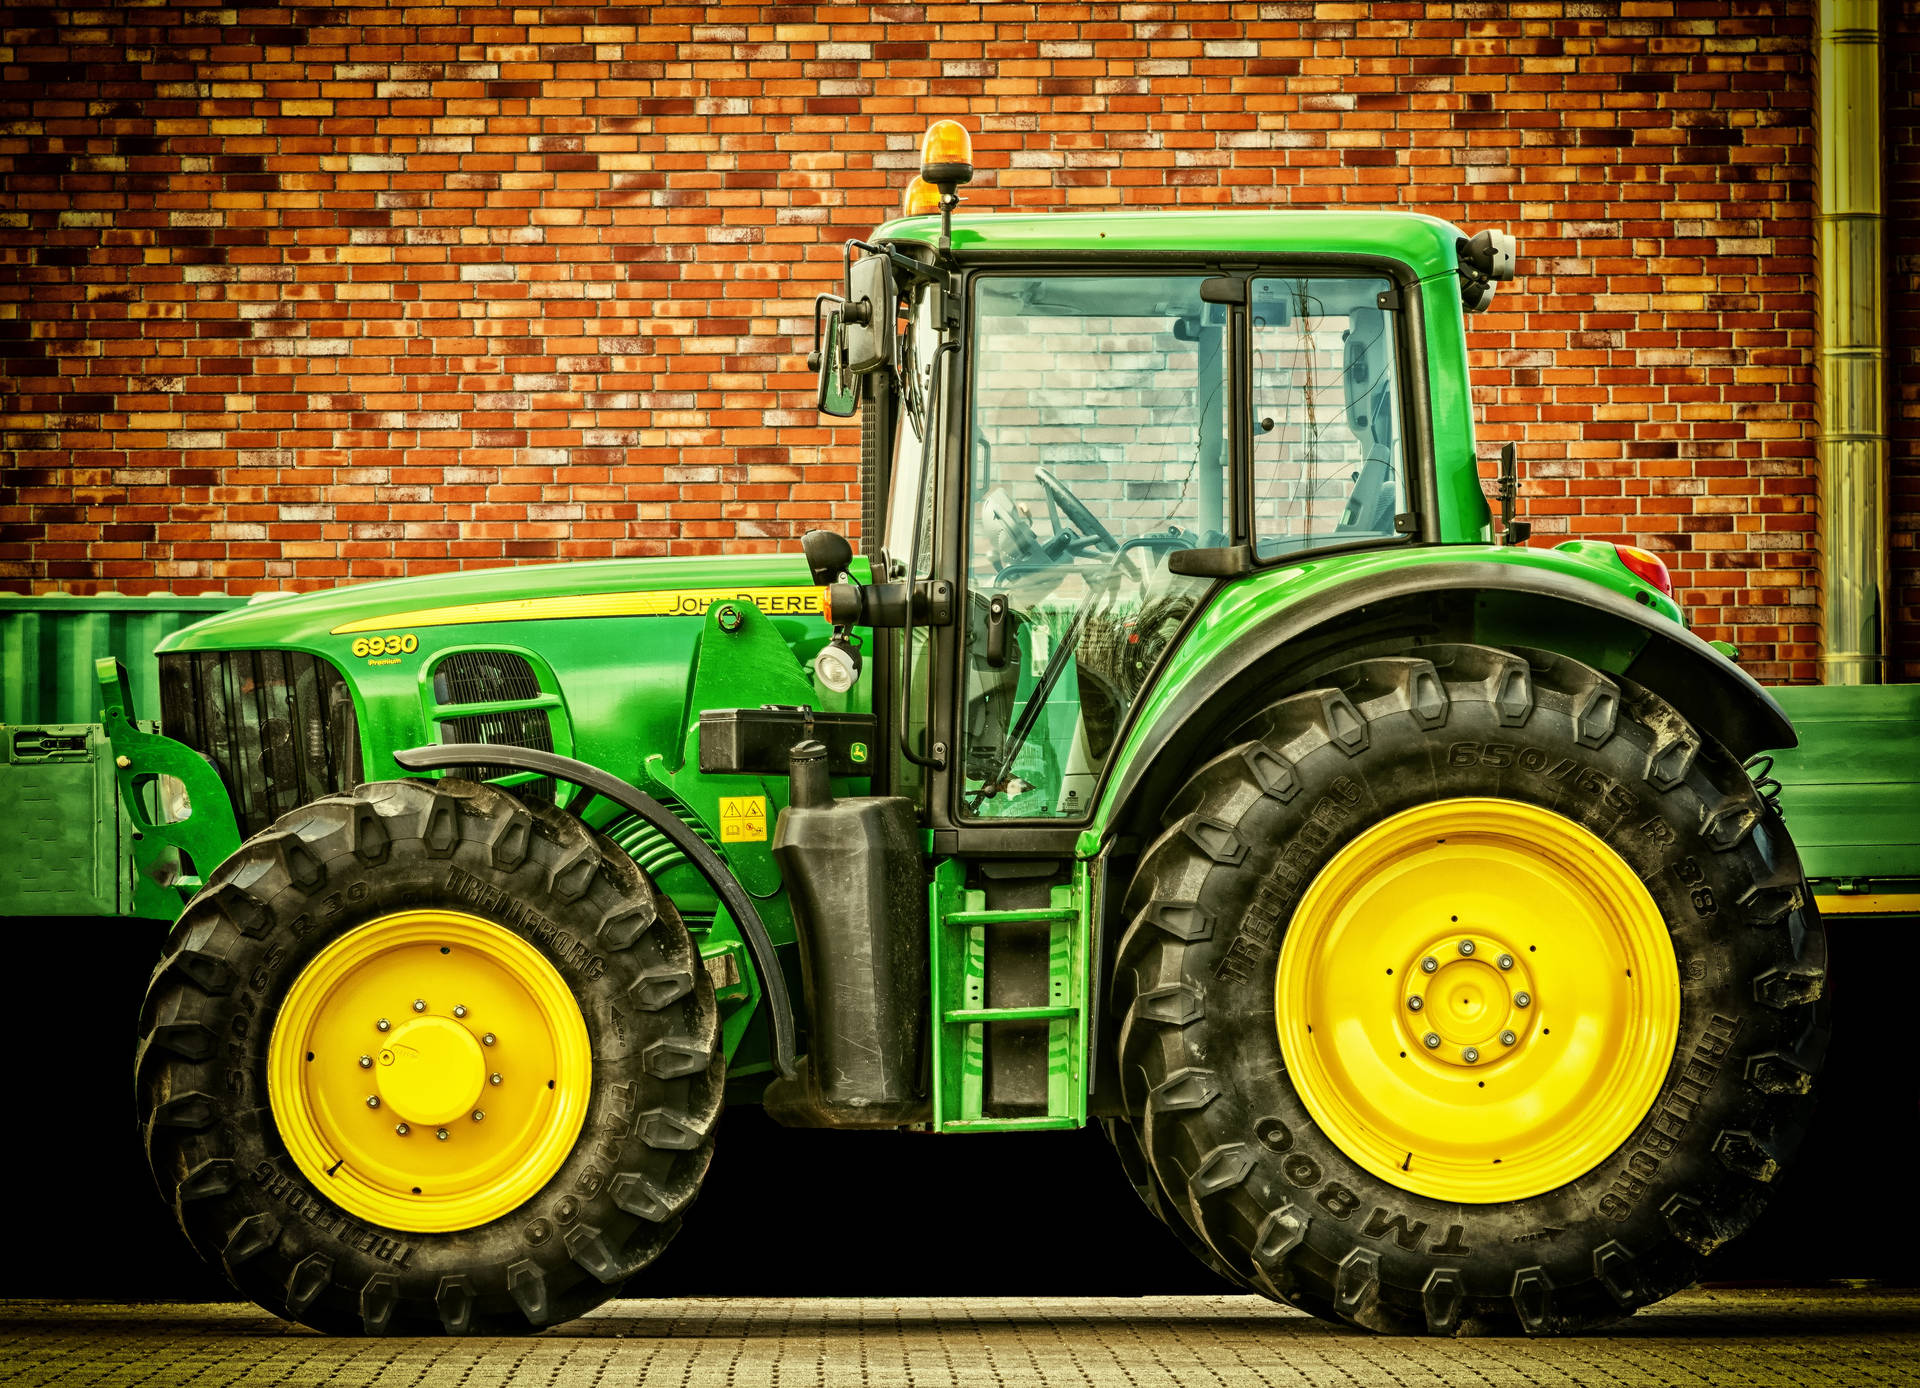 John Deere Tractor With Brick Wall Background